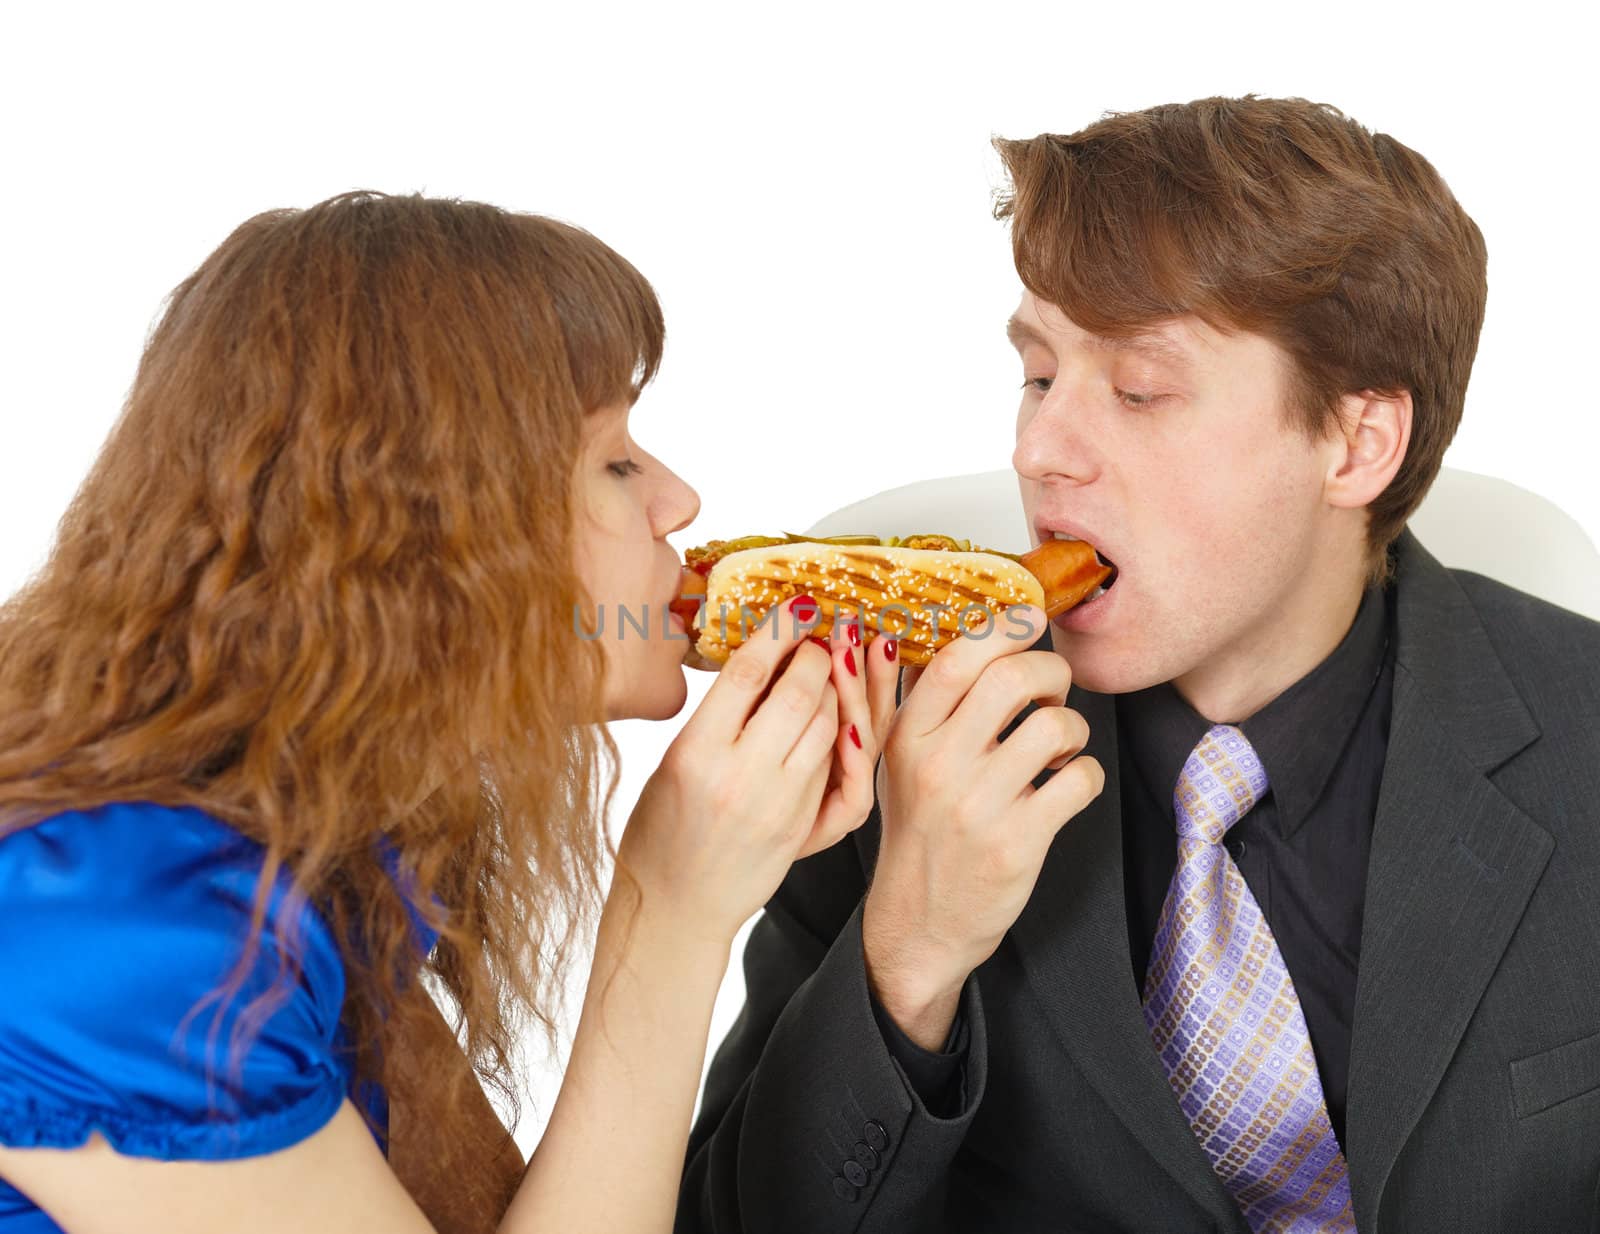 Man and woman eating a sausage in the roll